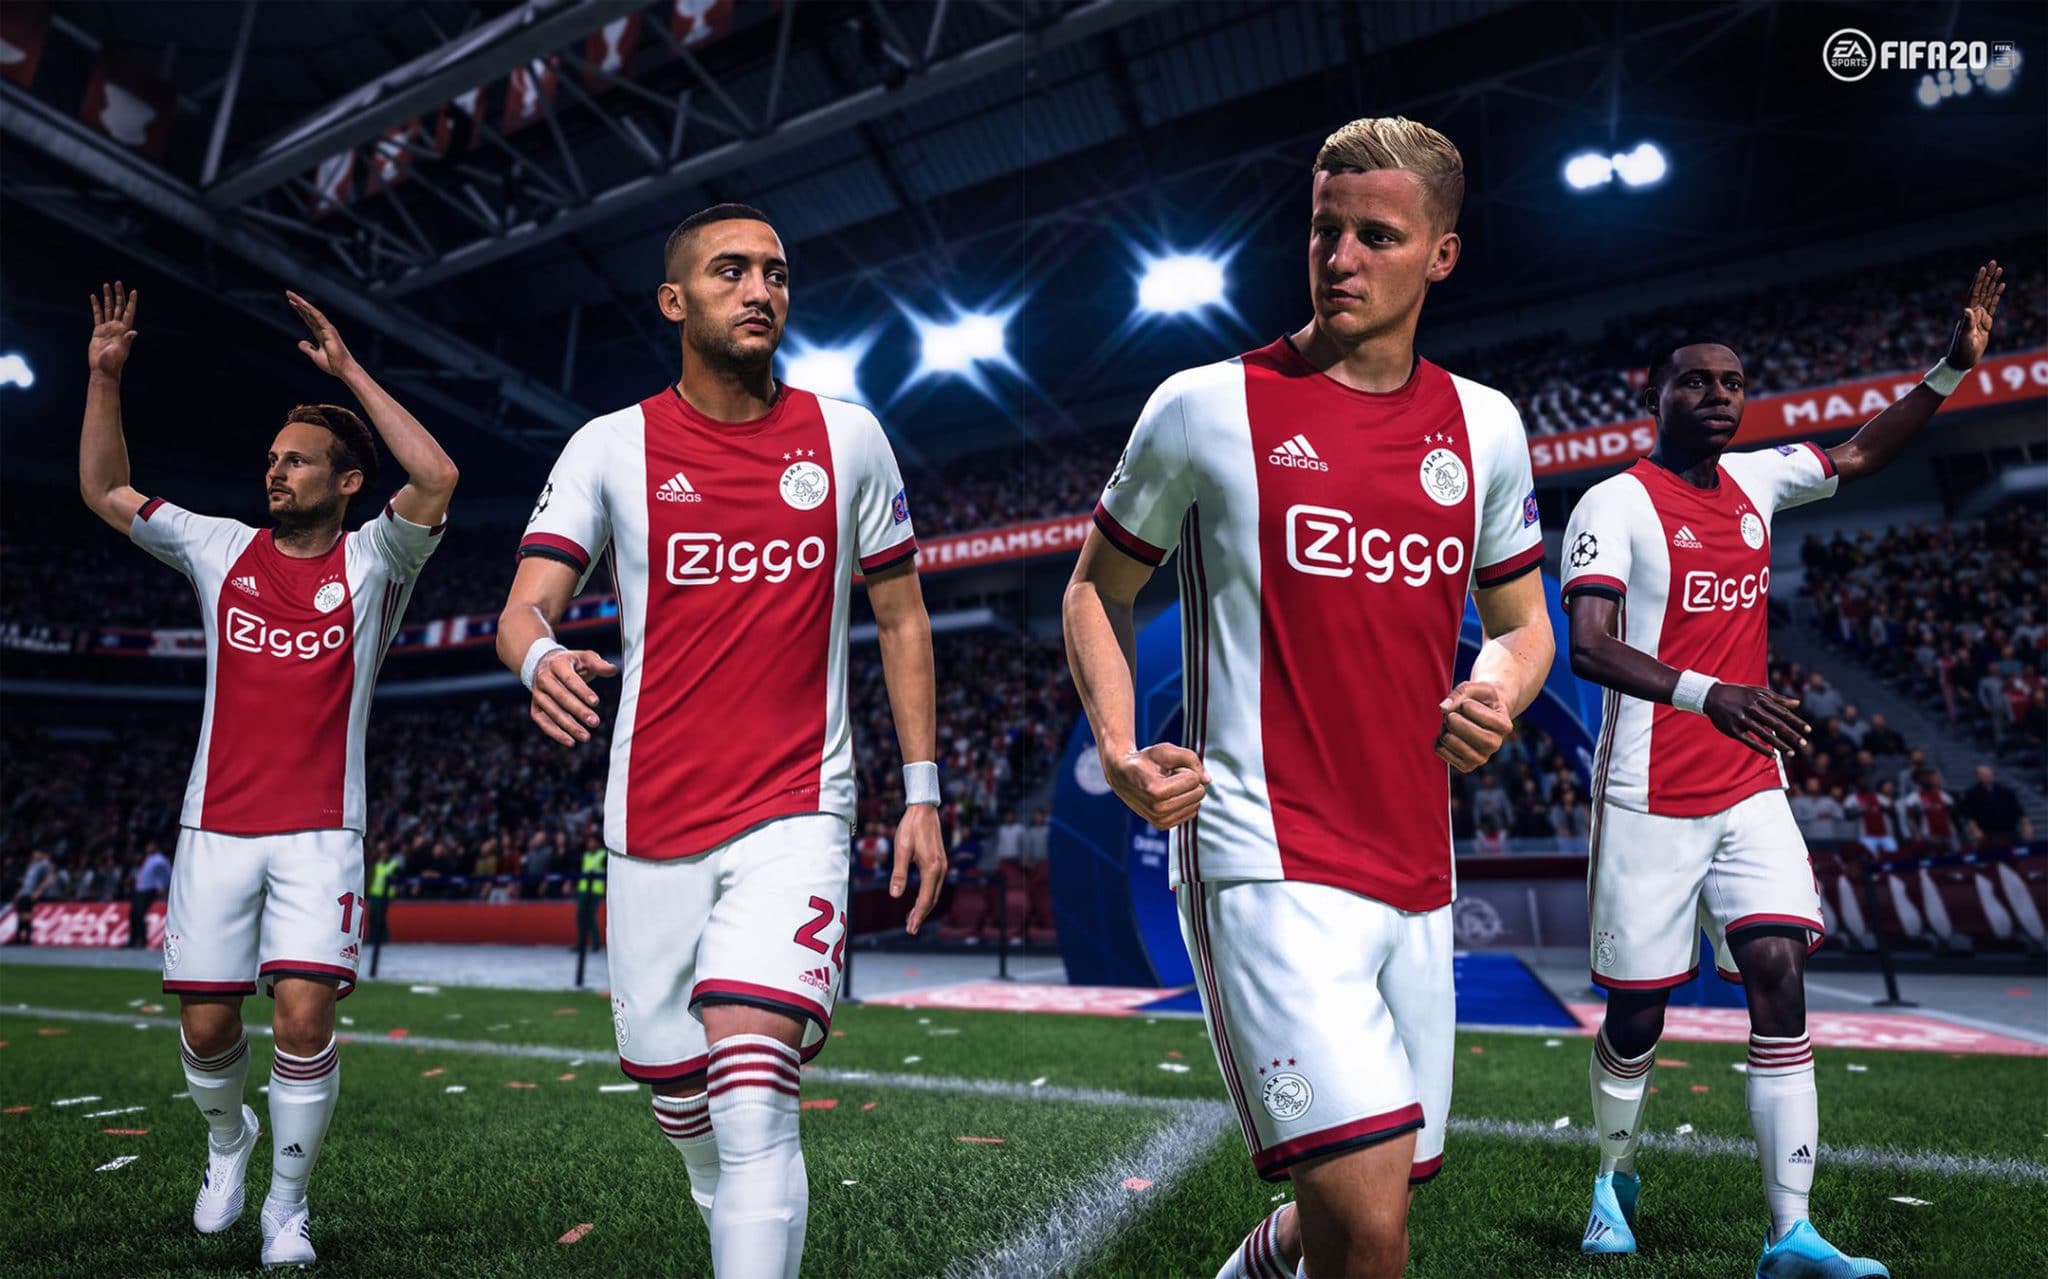 FIFA 20 - Annunciata l'EA Sports Stay and Play Cup 2